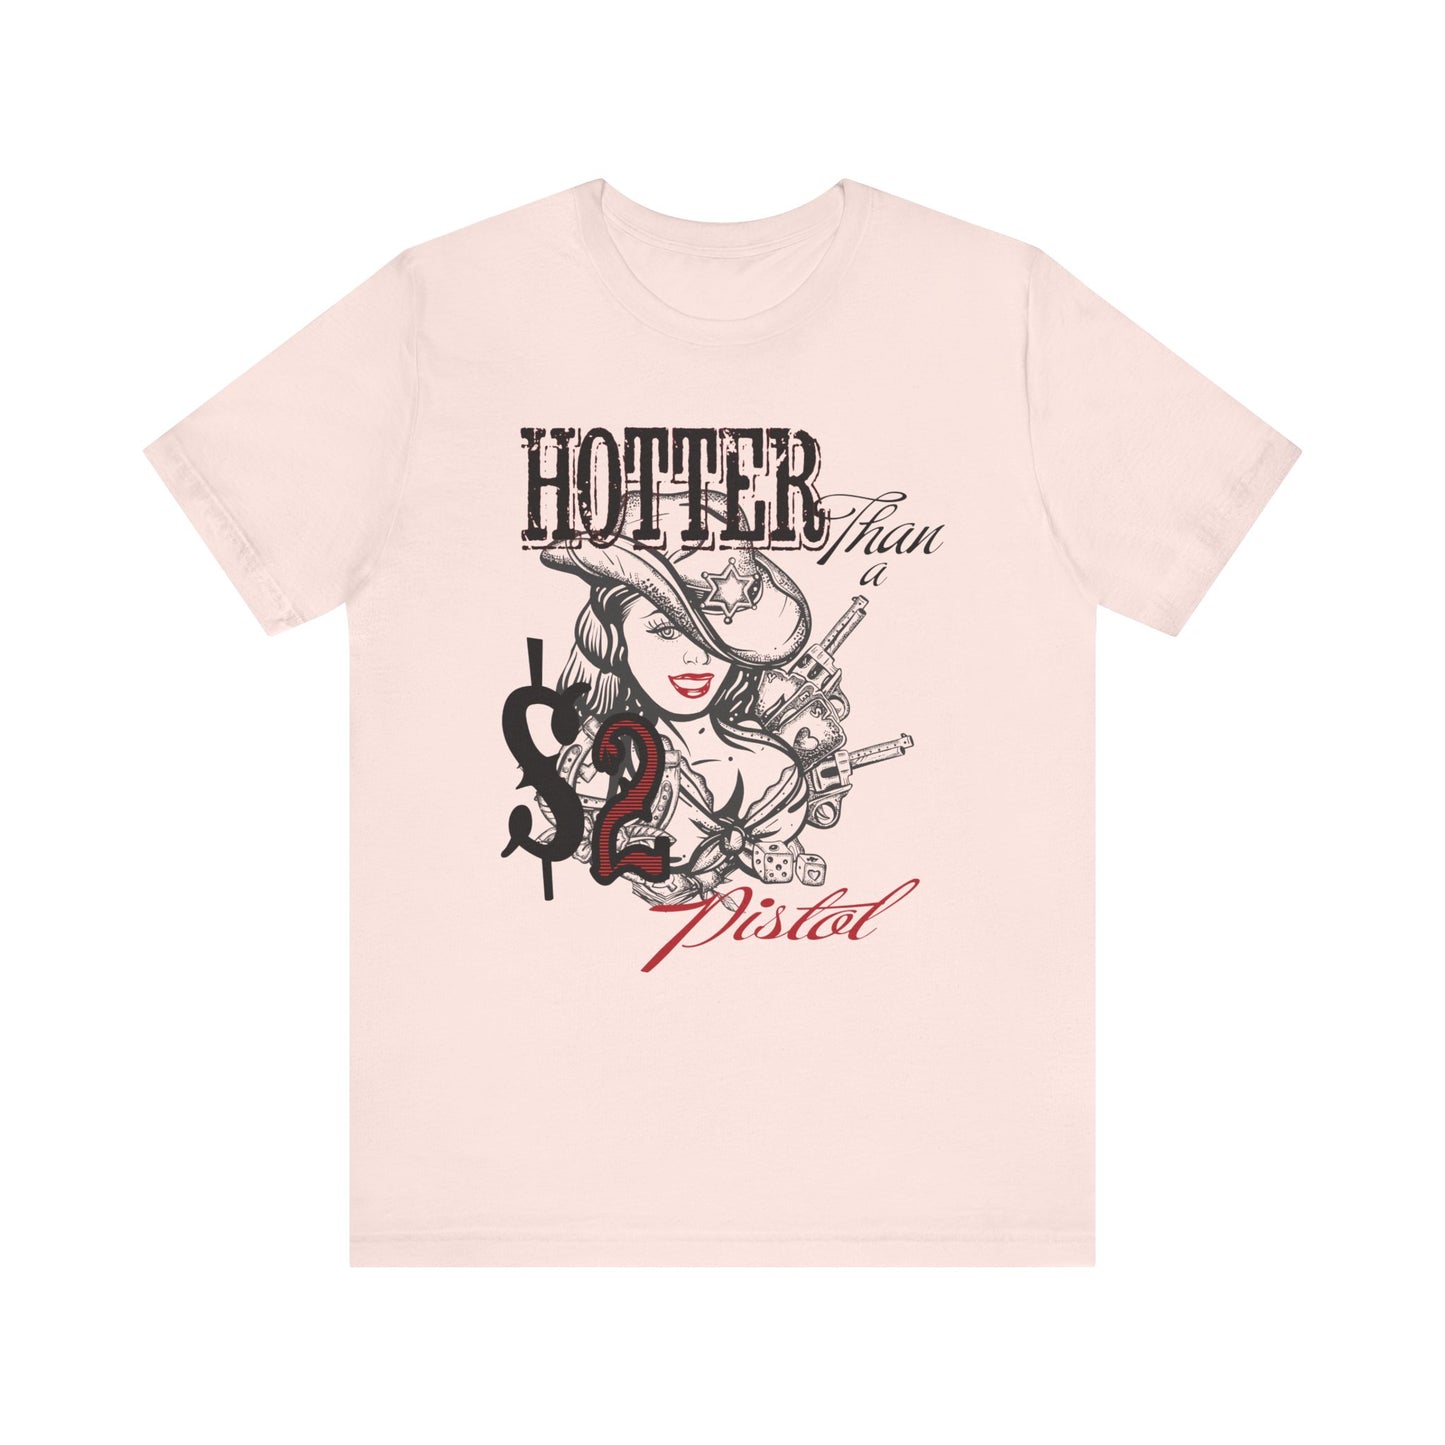 Hotter Than a $2 Pistol Graphic Tee